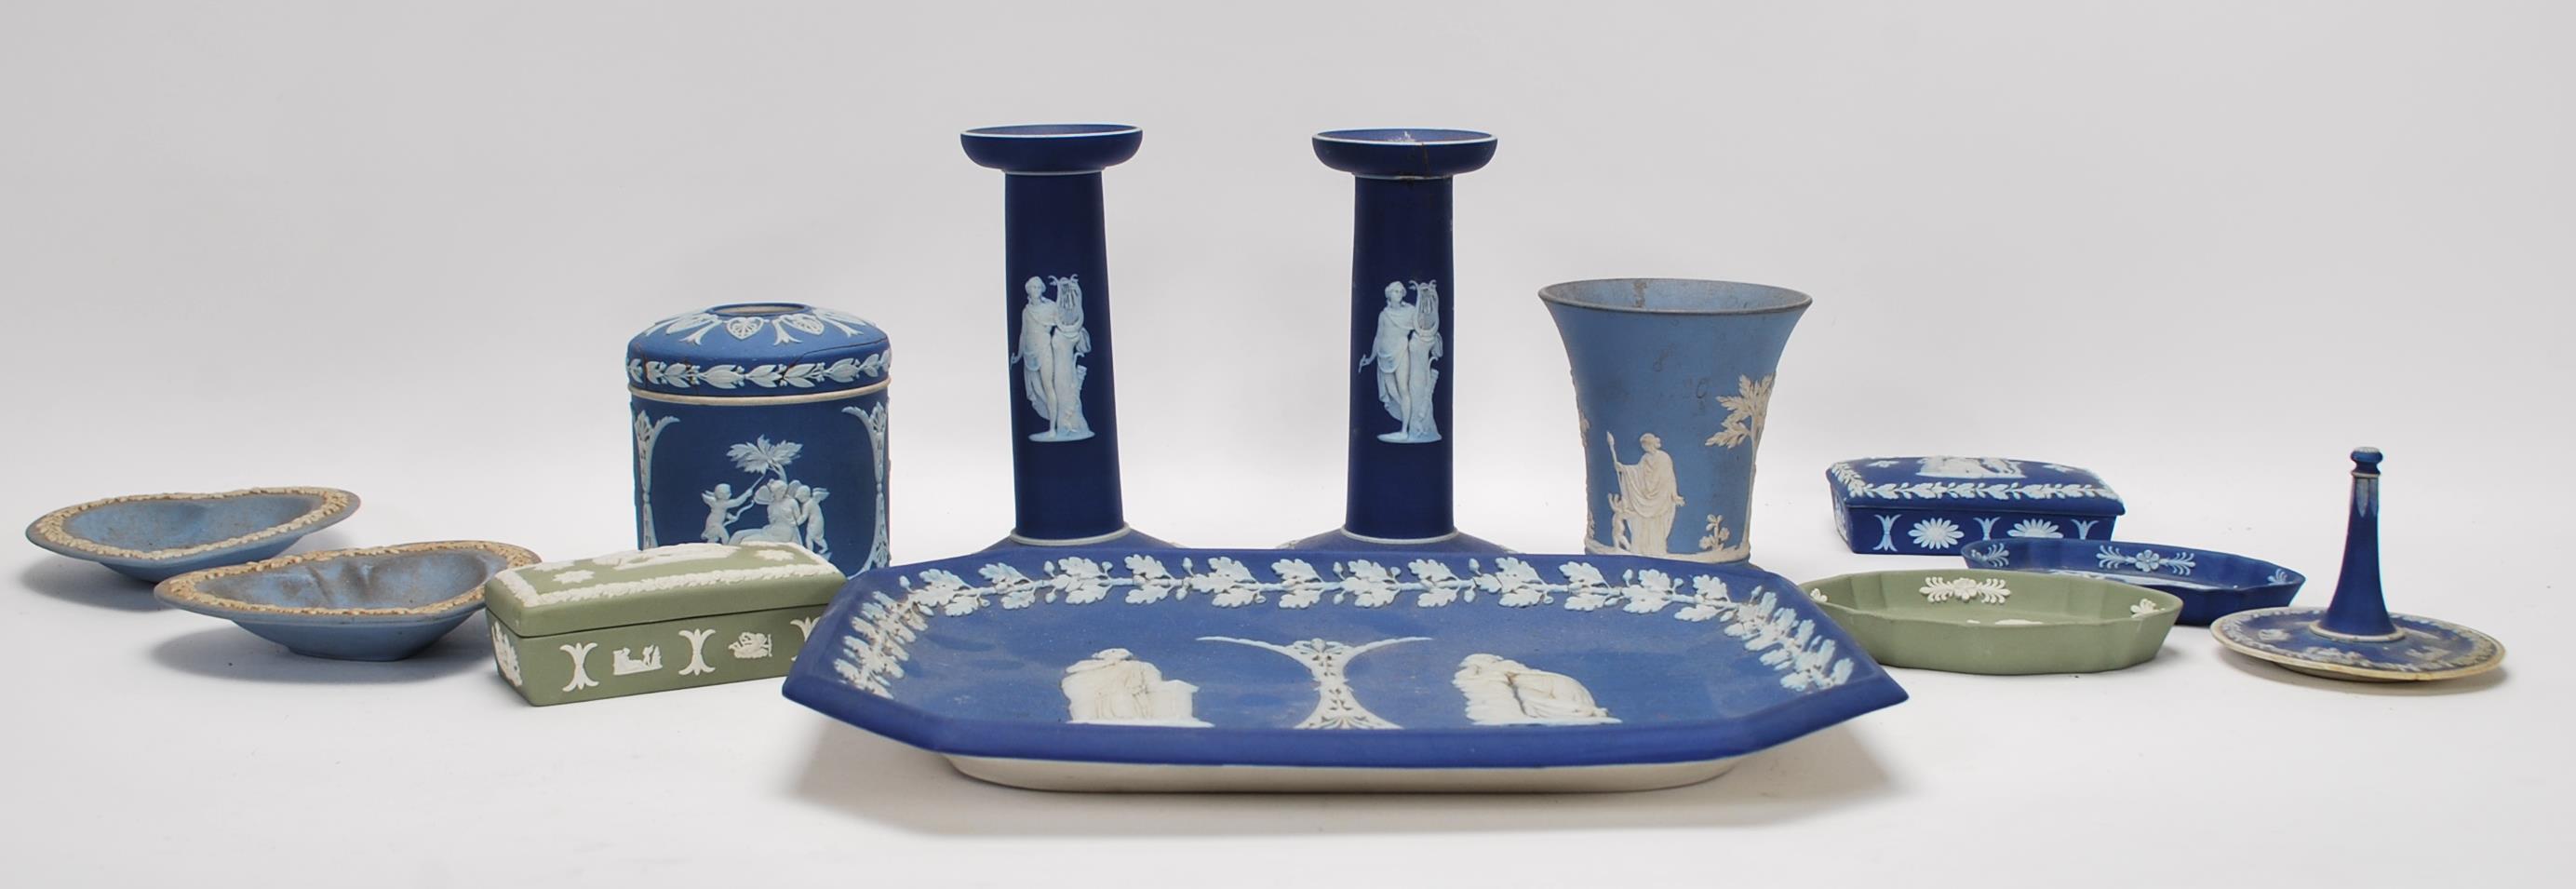 A collection of Wedgwood jasper-ware to include a pair of 19th Century cobalt blue candlesticks, hat